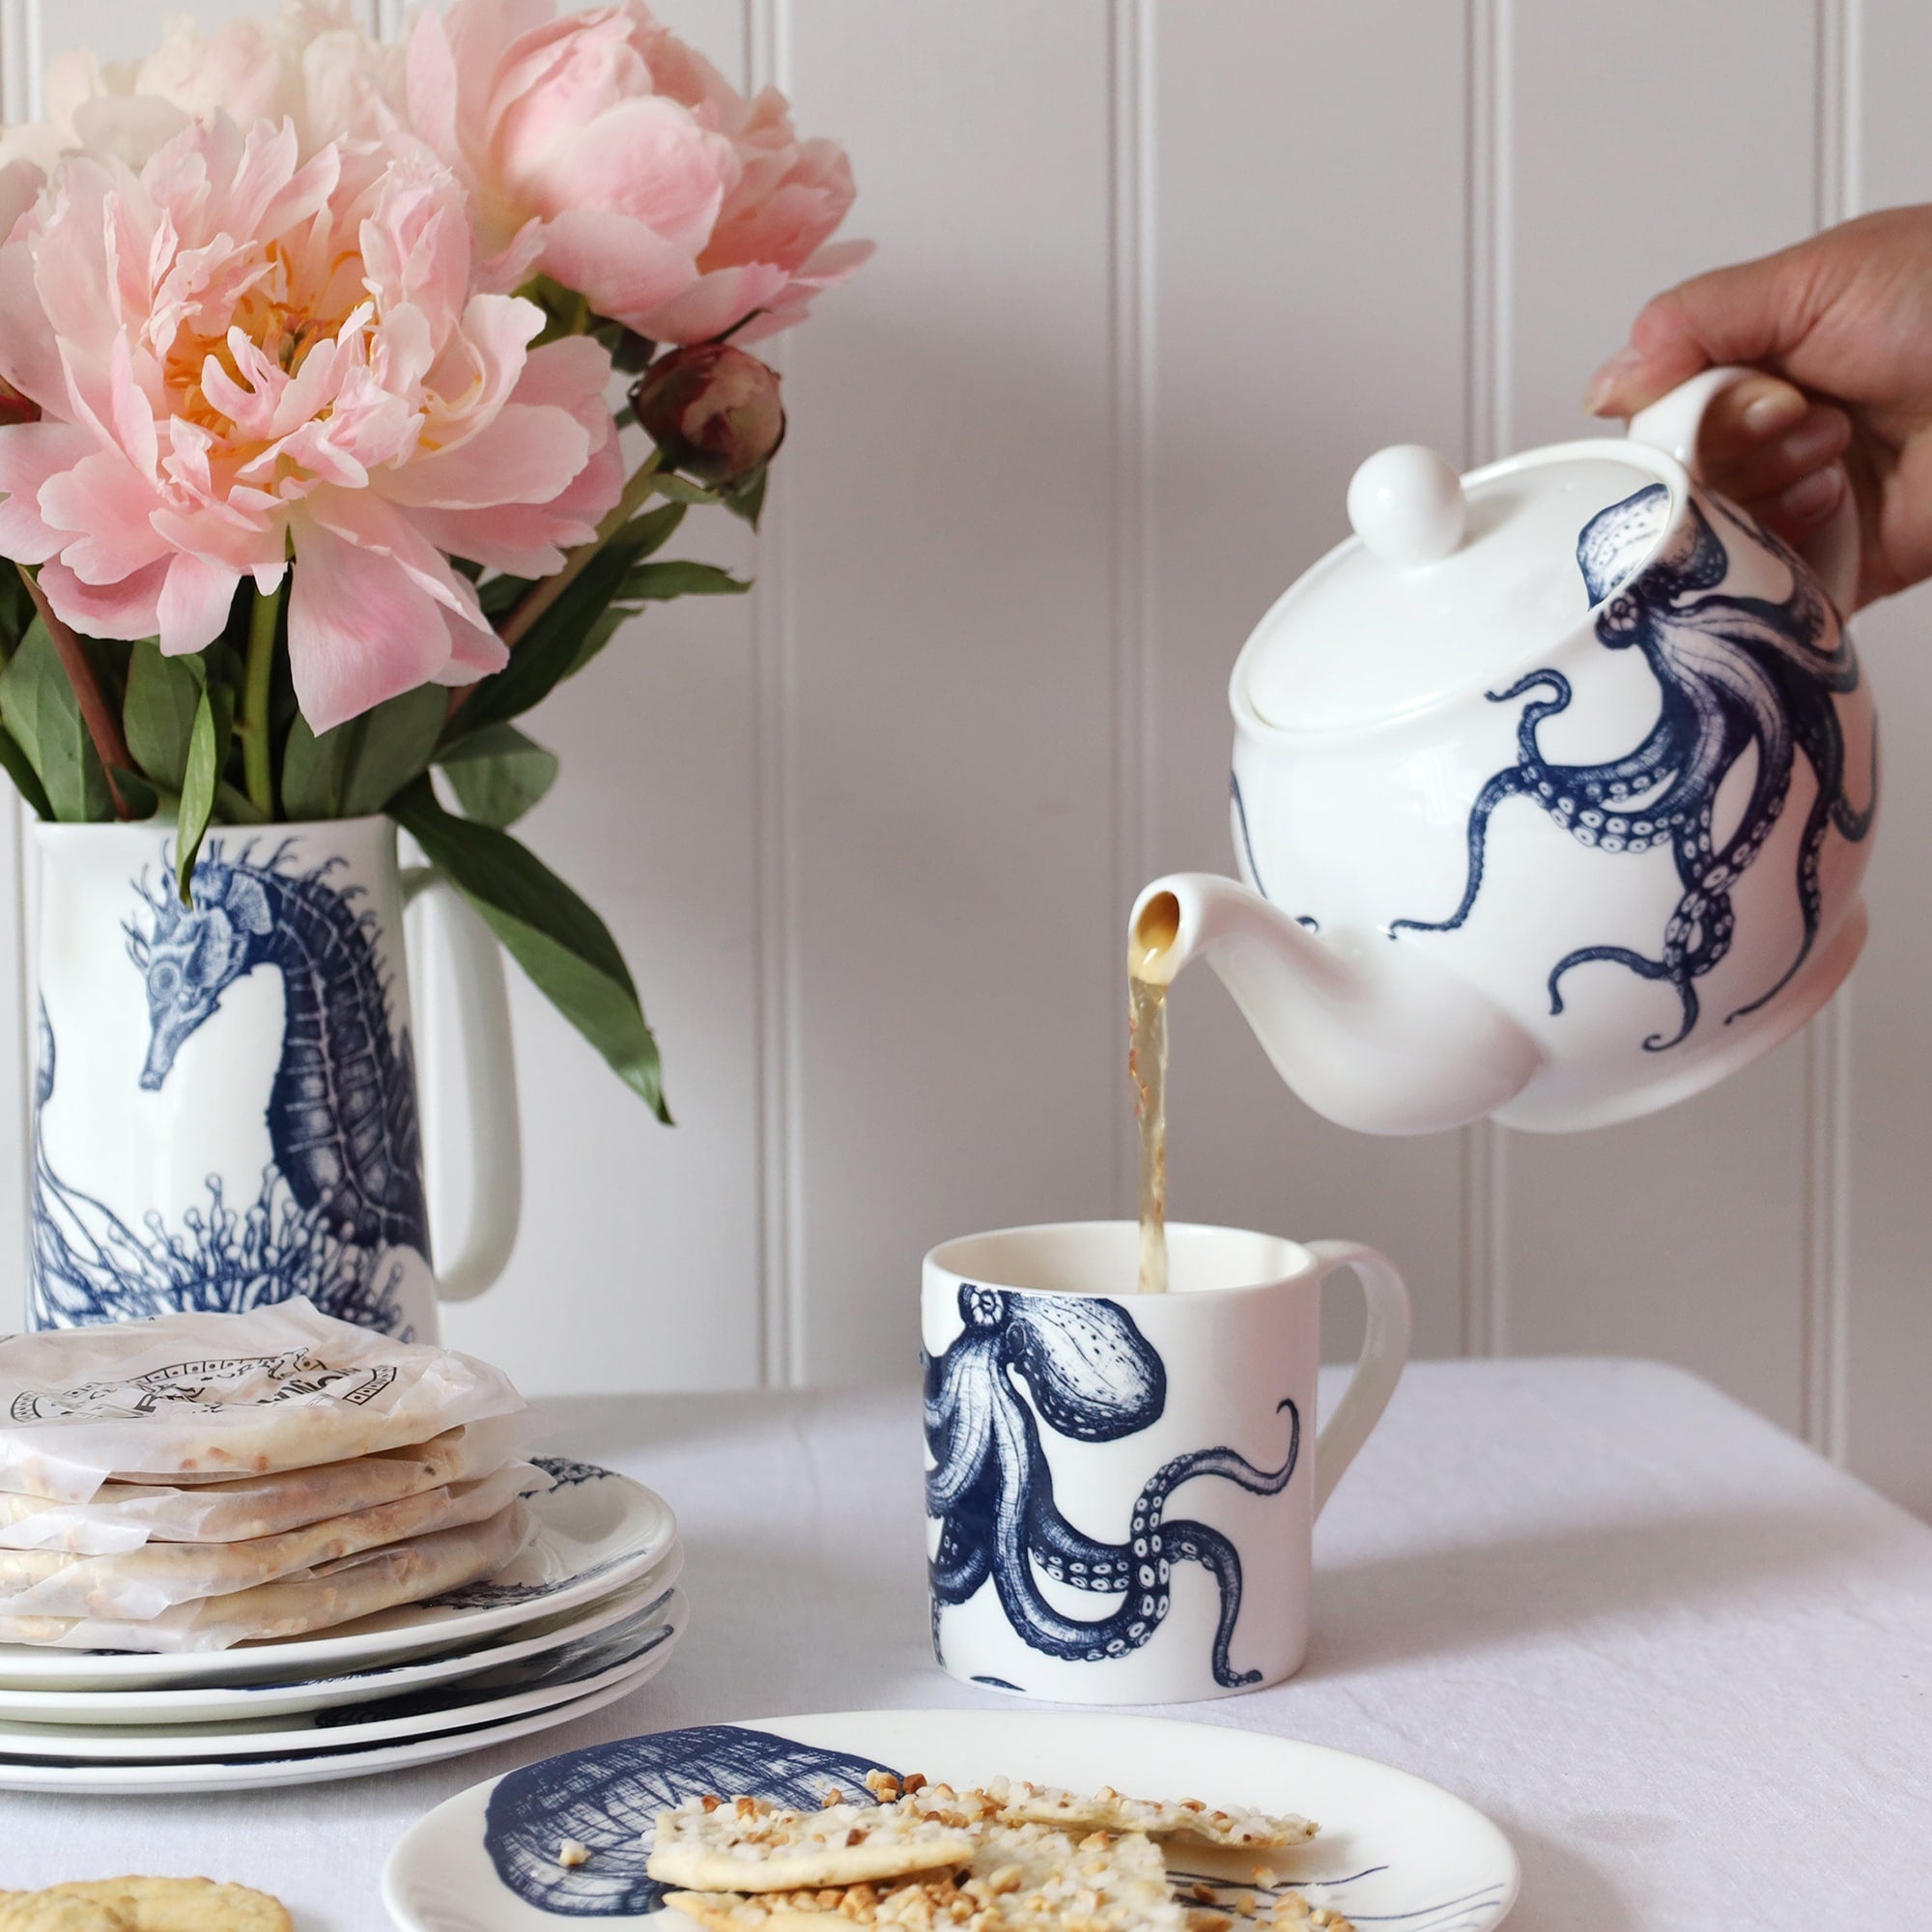 A blue & white informal table setting set against a white shiplap wall and linen tablecloth. An octopus design adorns a teapot which is pouring tea into a white bone china mug decorated with a blue illustrated octopus..